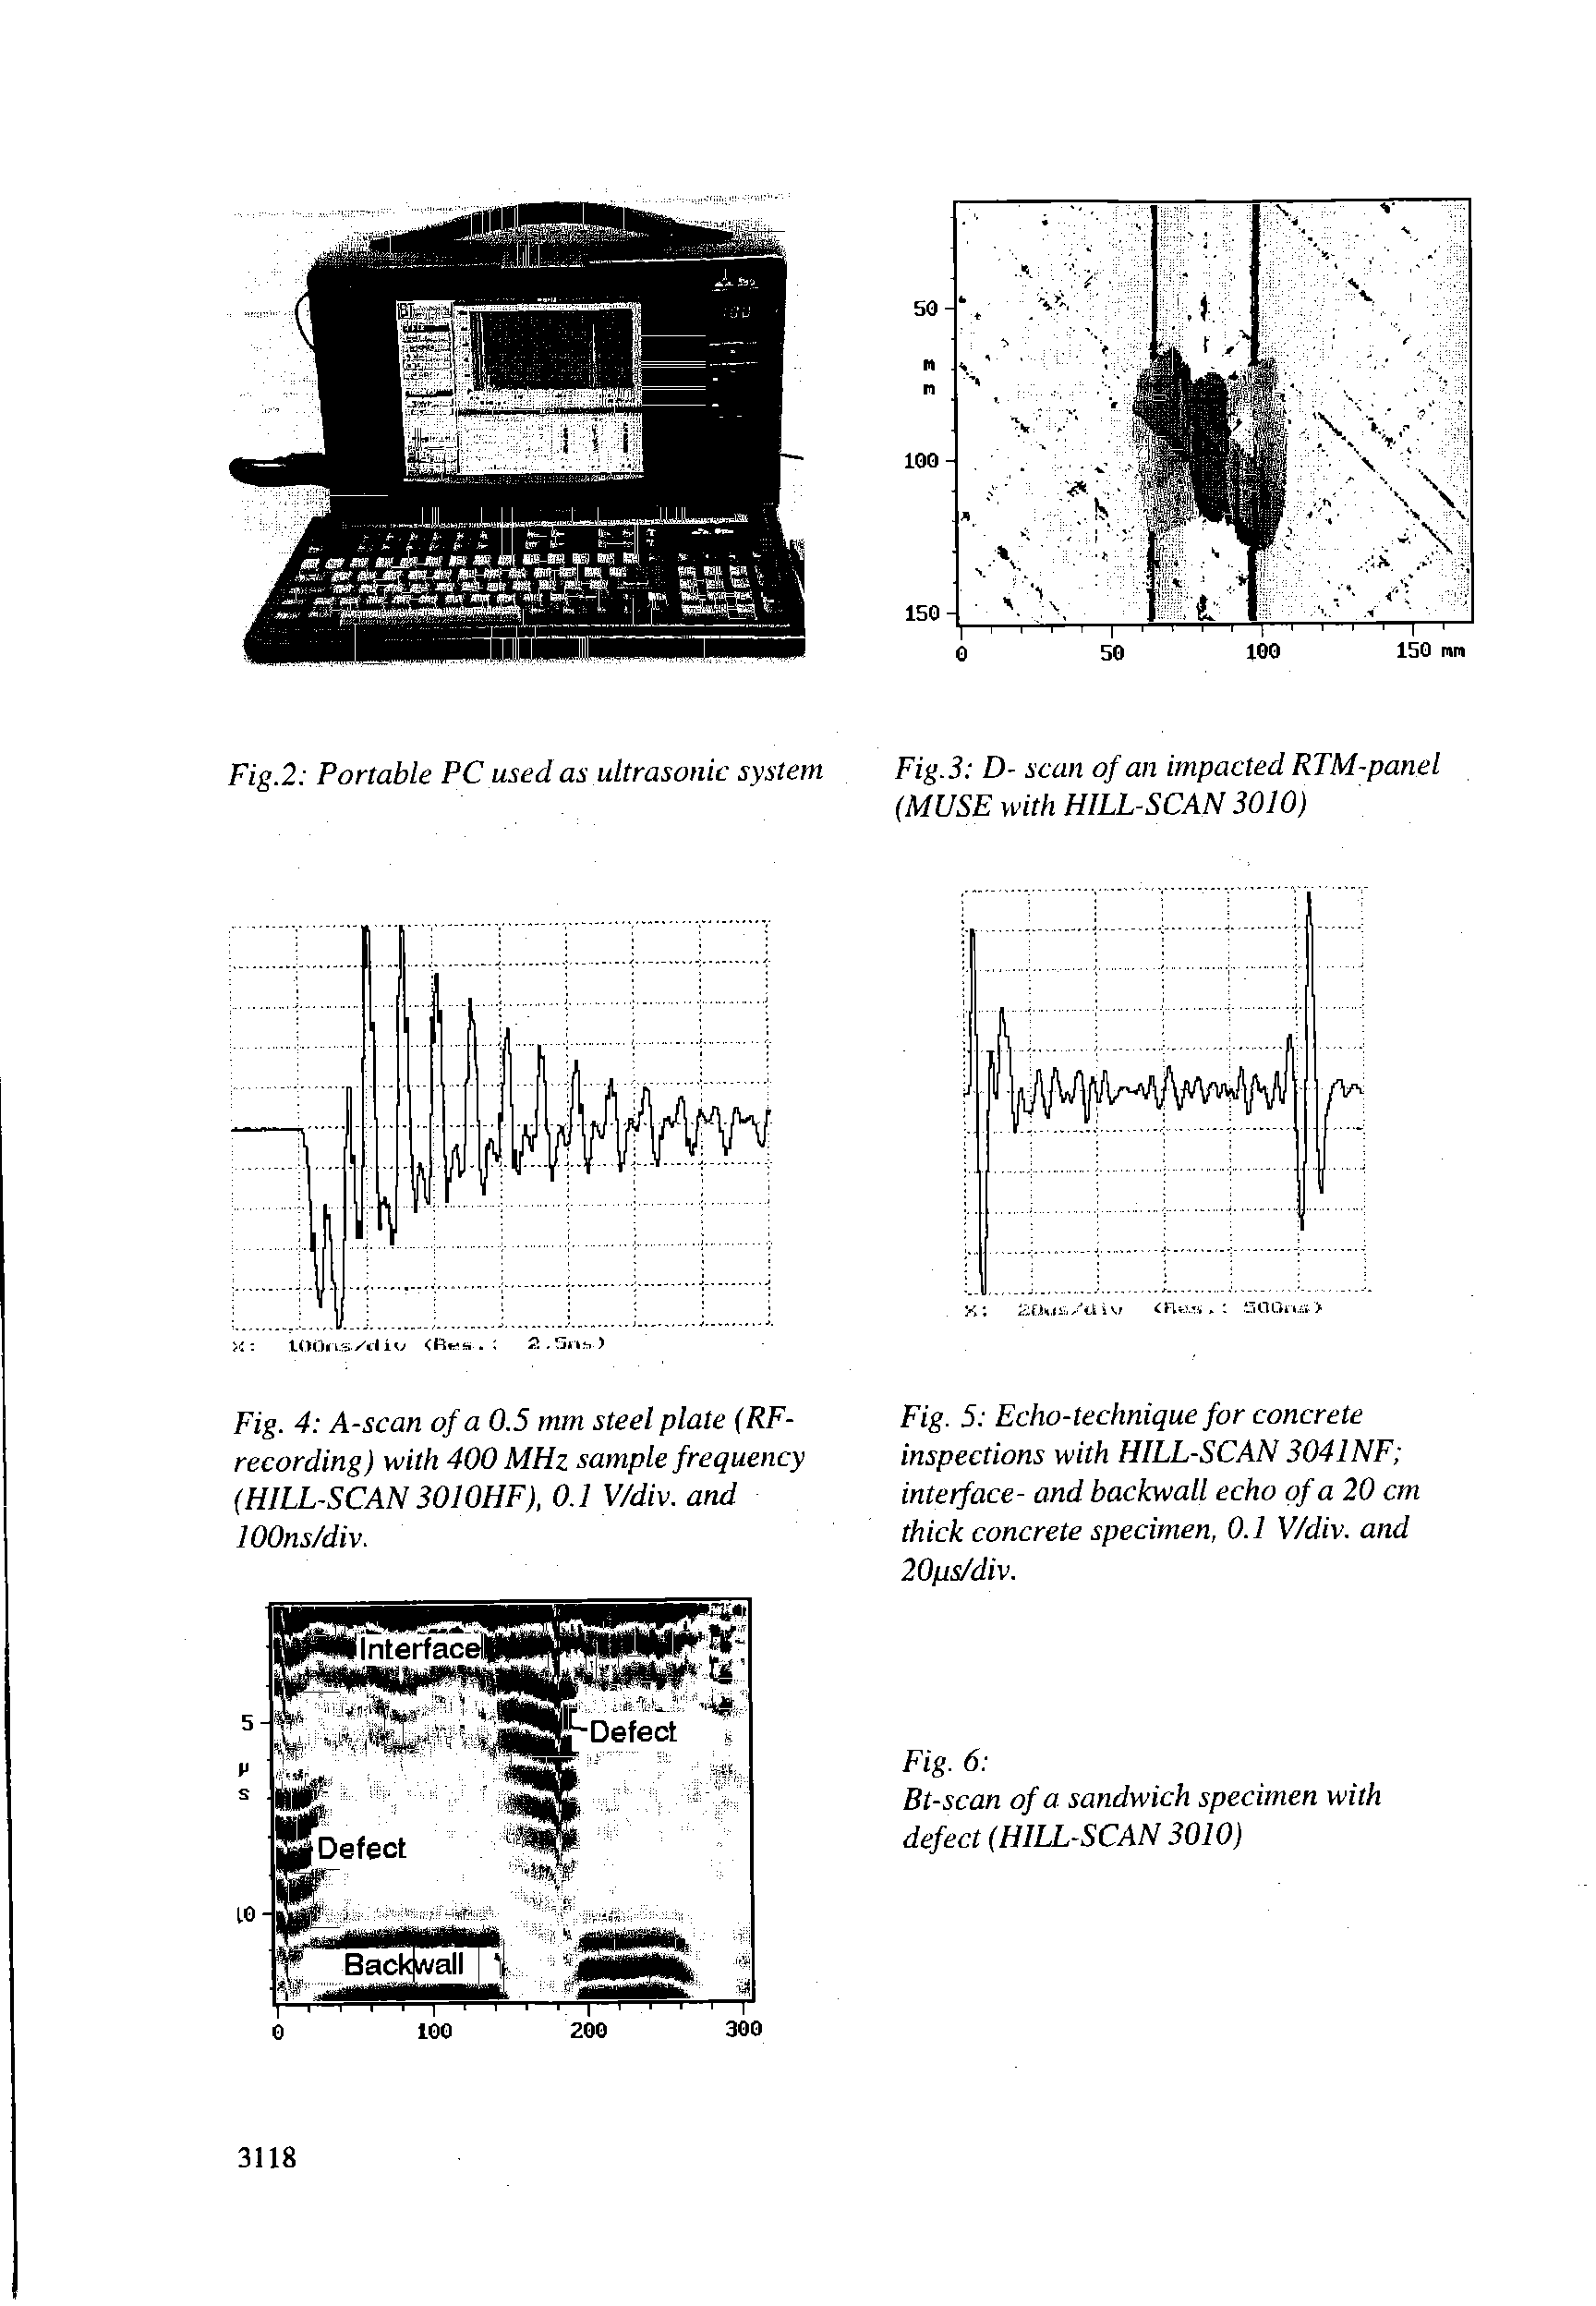 Fig. 5 Echo-technique for concrete inspections with HILL-SCAN 304INF interface- and backwall echo of a 20 cm thick concrete specimen, 0.1 V/div. and 20ps/div.